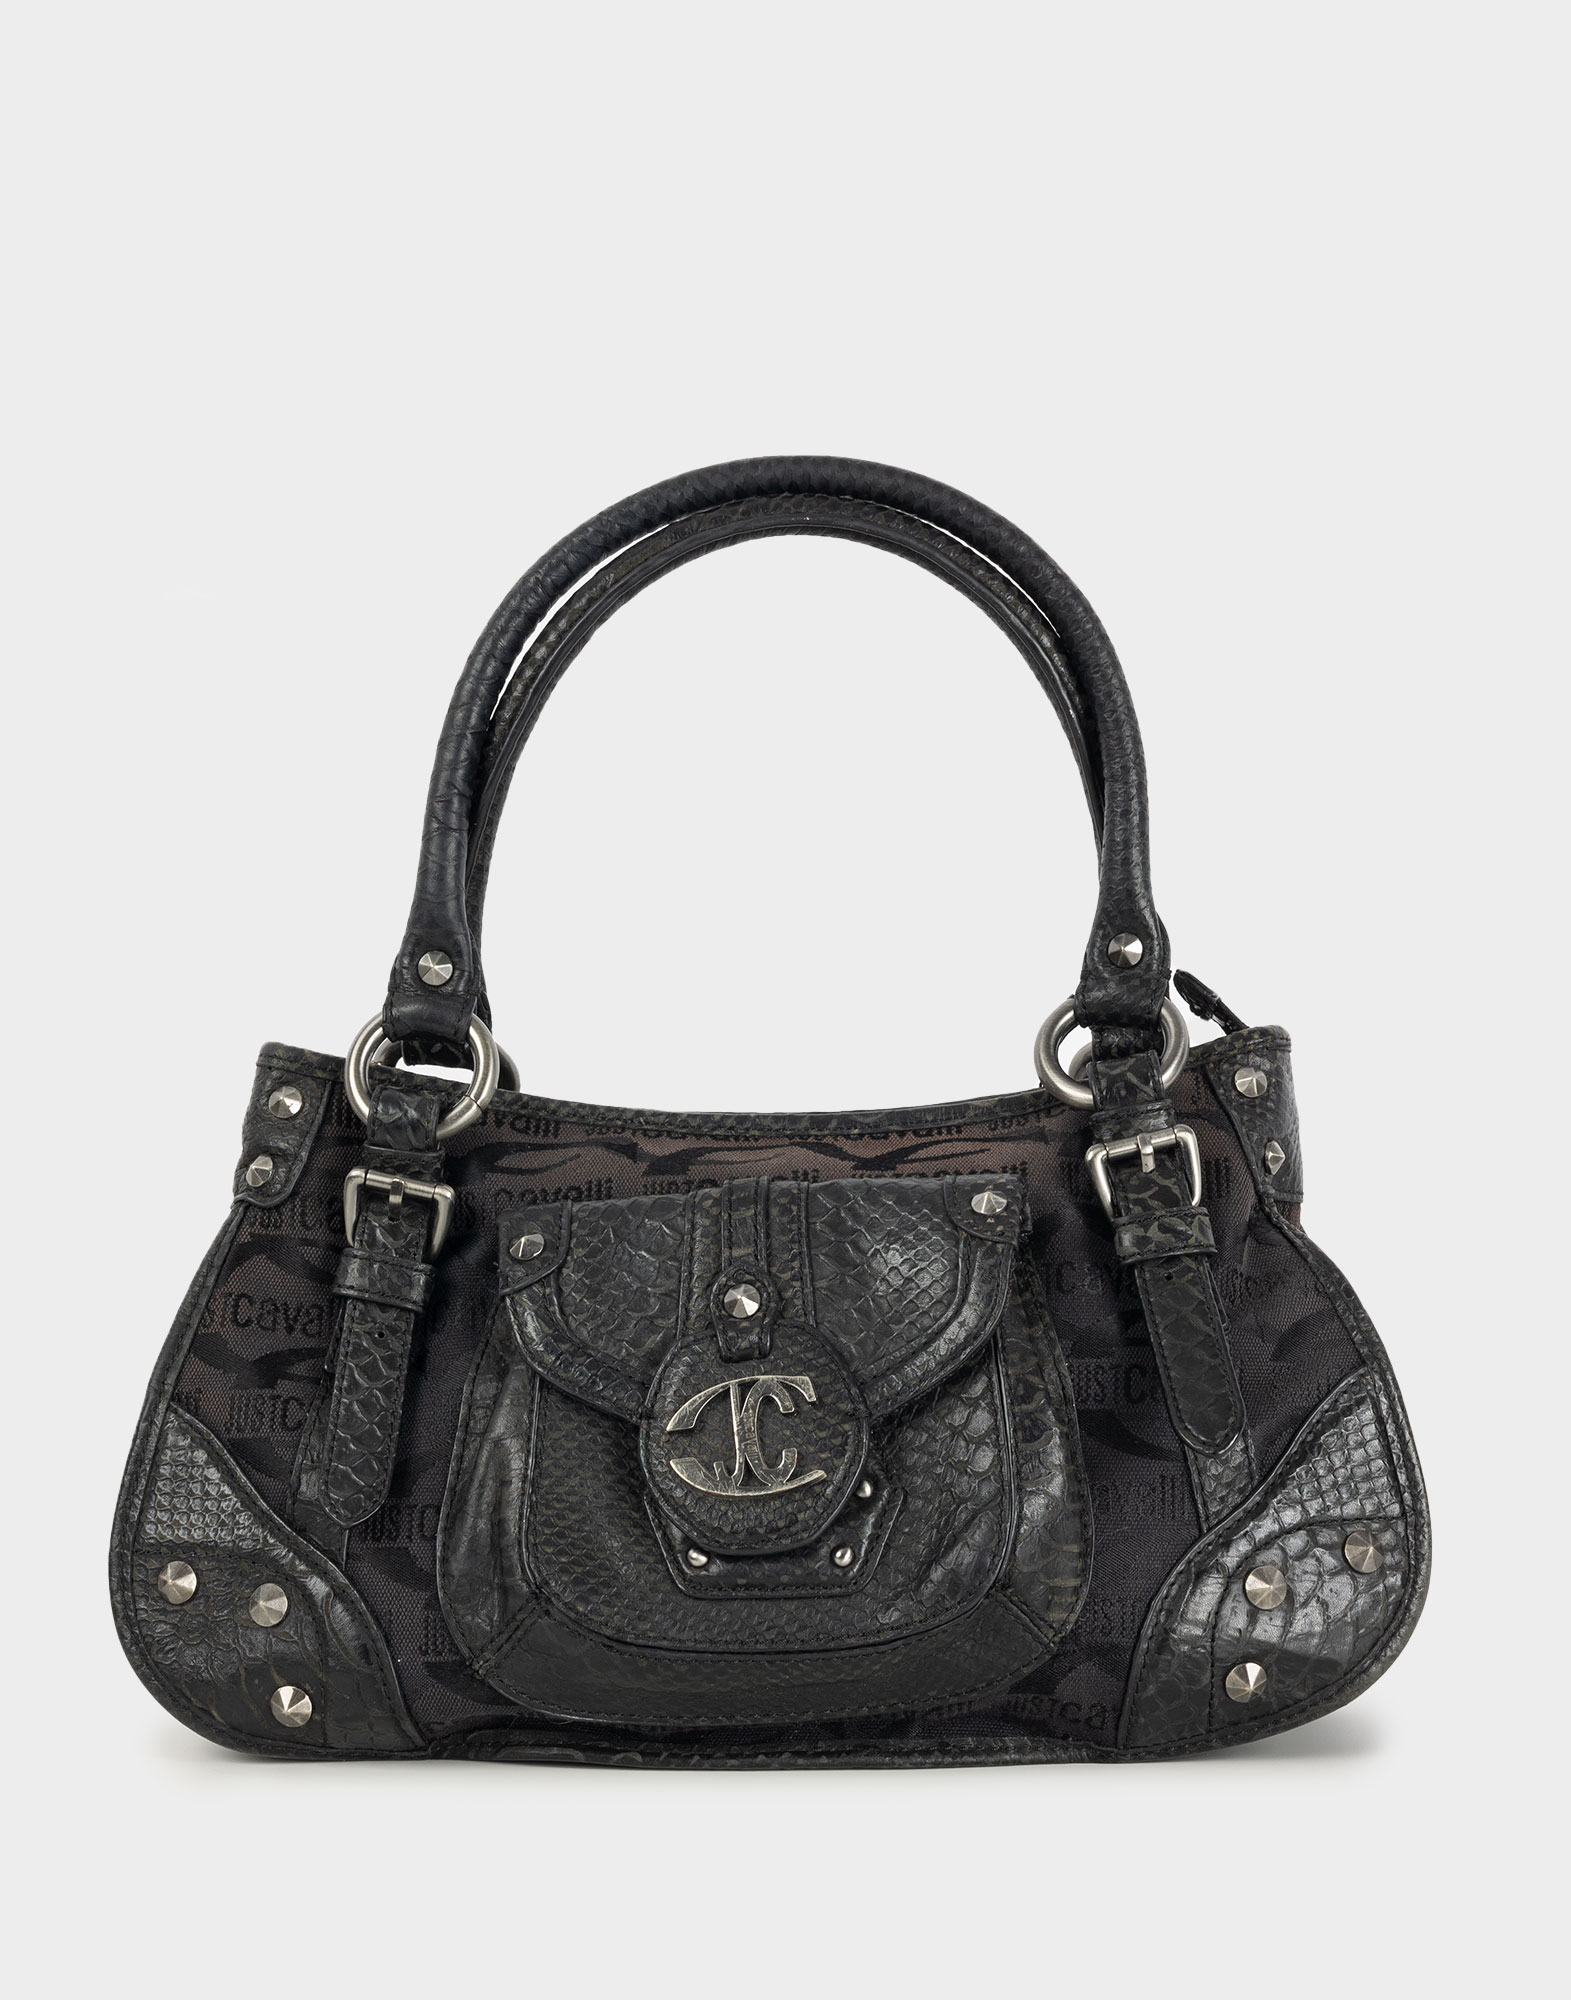 black 2000s women's bag with double leather handle, logo fabric canvas and snakeskin detailing